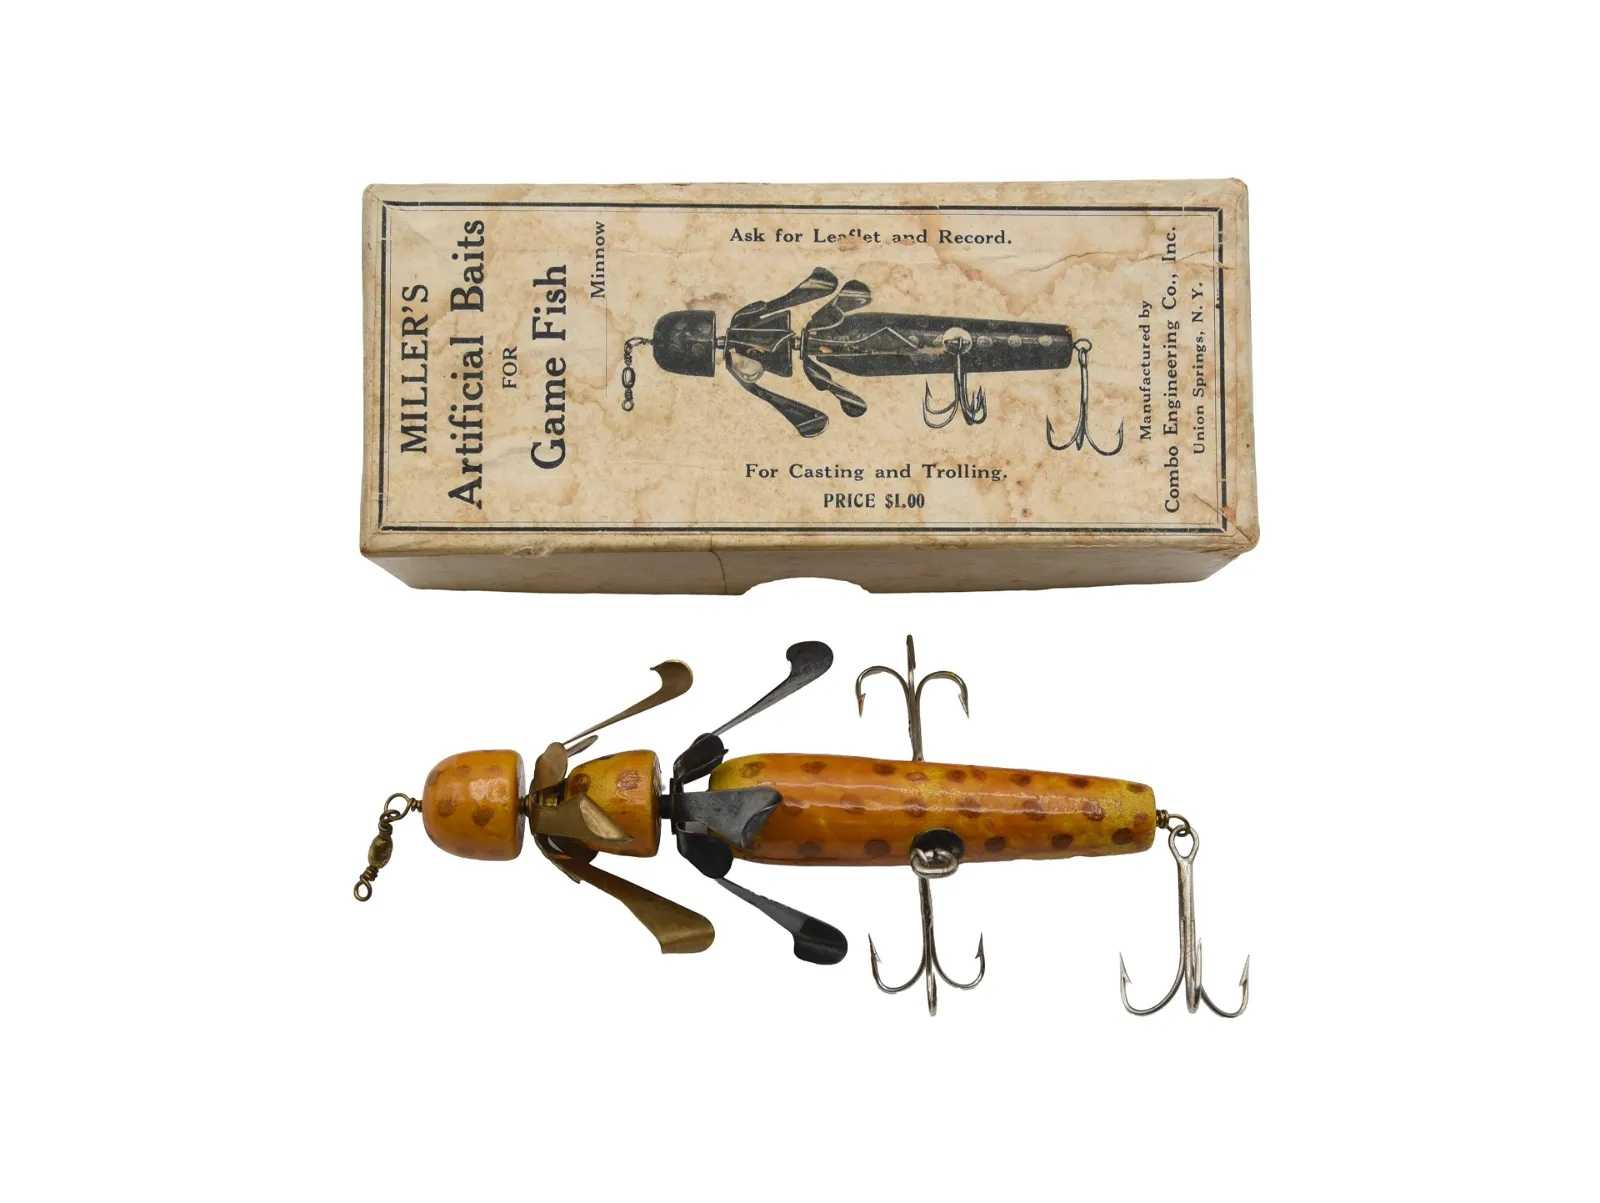 Miller's Artificial Baits For Game Fish Minnow lure with original box, estimated at $3,000-$4,000 at Blanchard’s Auction Service April 26.